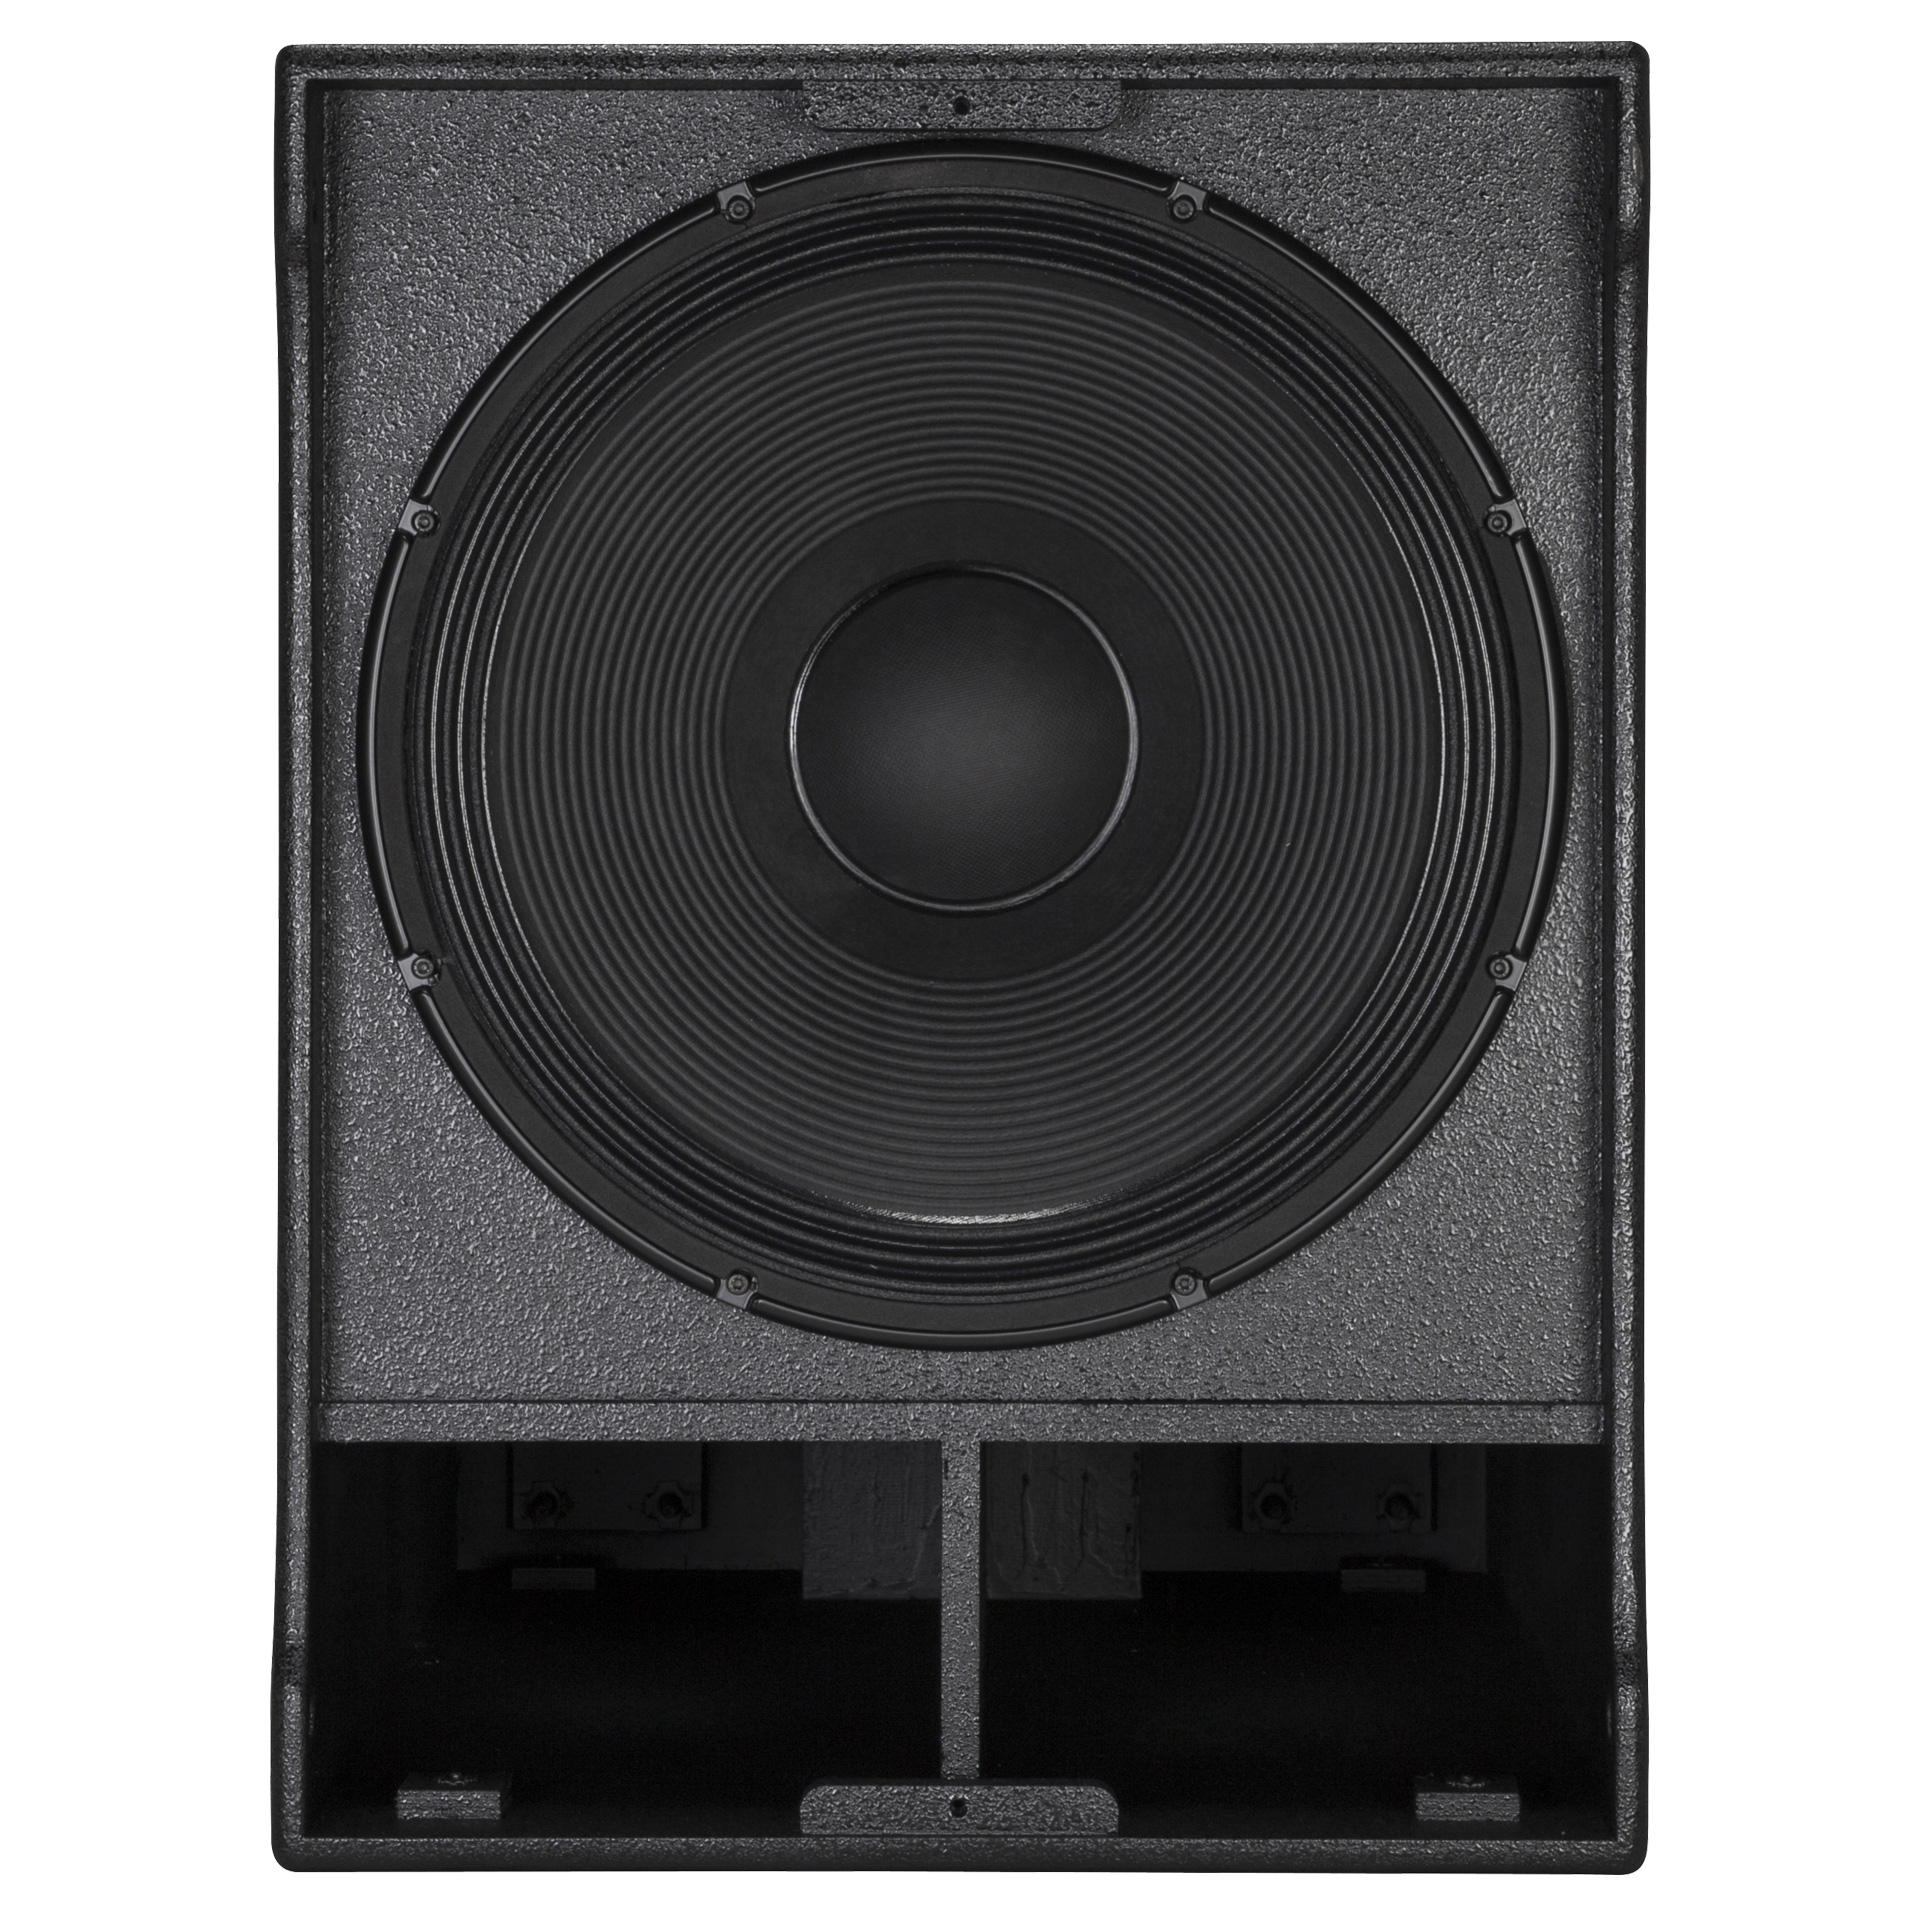 Rcf Sub 8003-as Ii - Active subwoofer - Variation 2